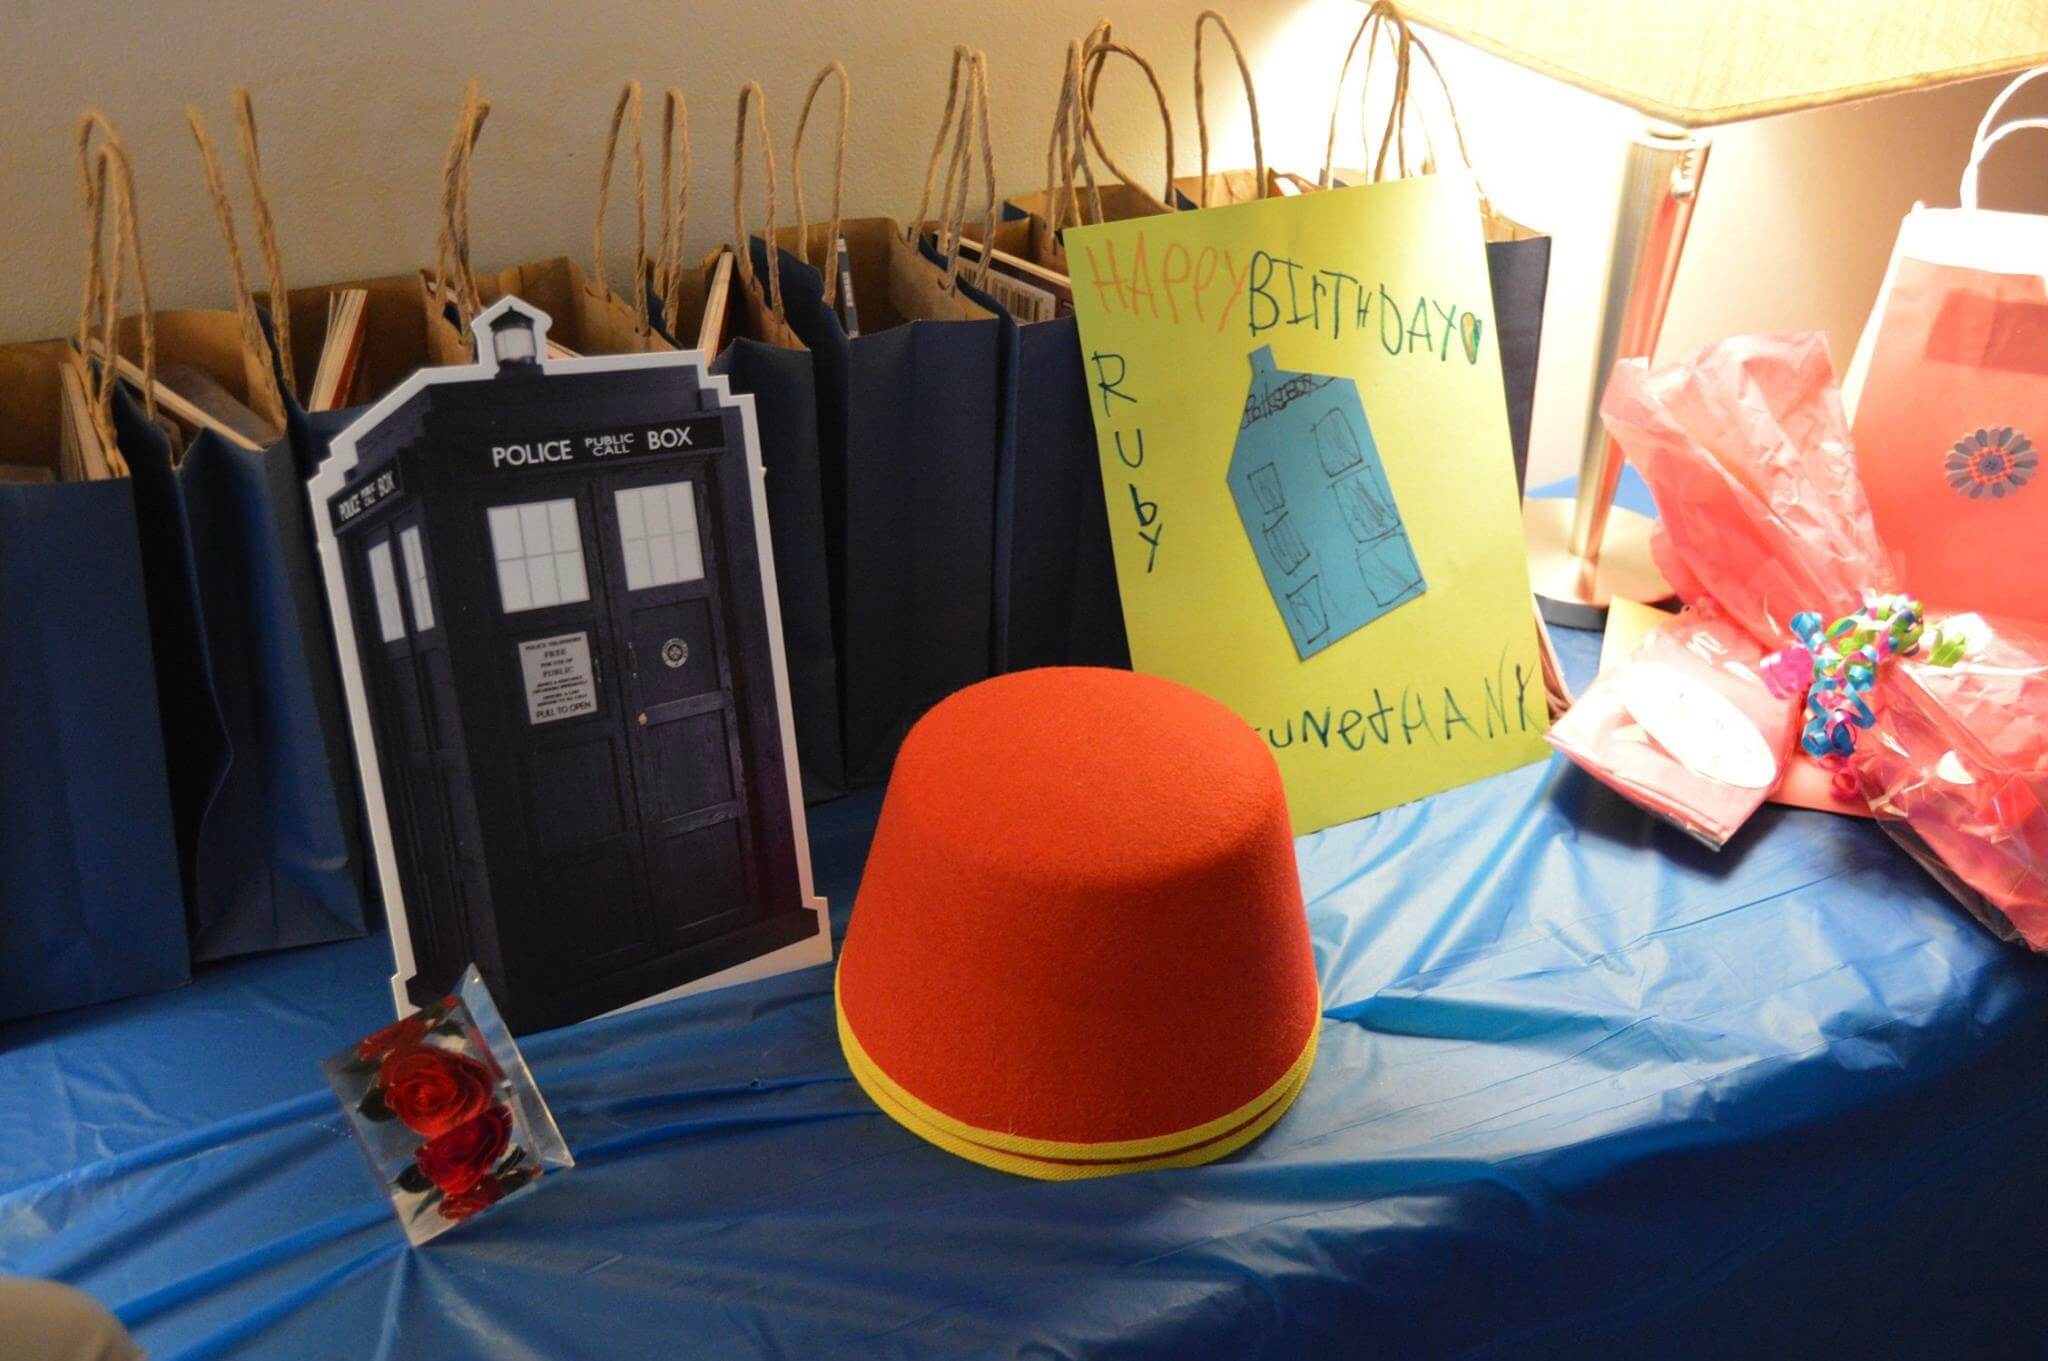 Doctor Who Themed Party